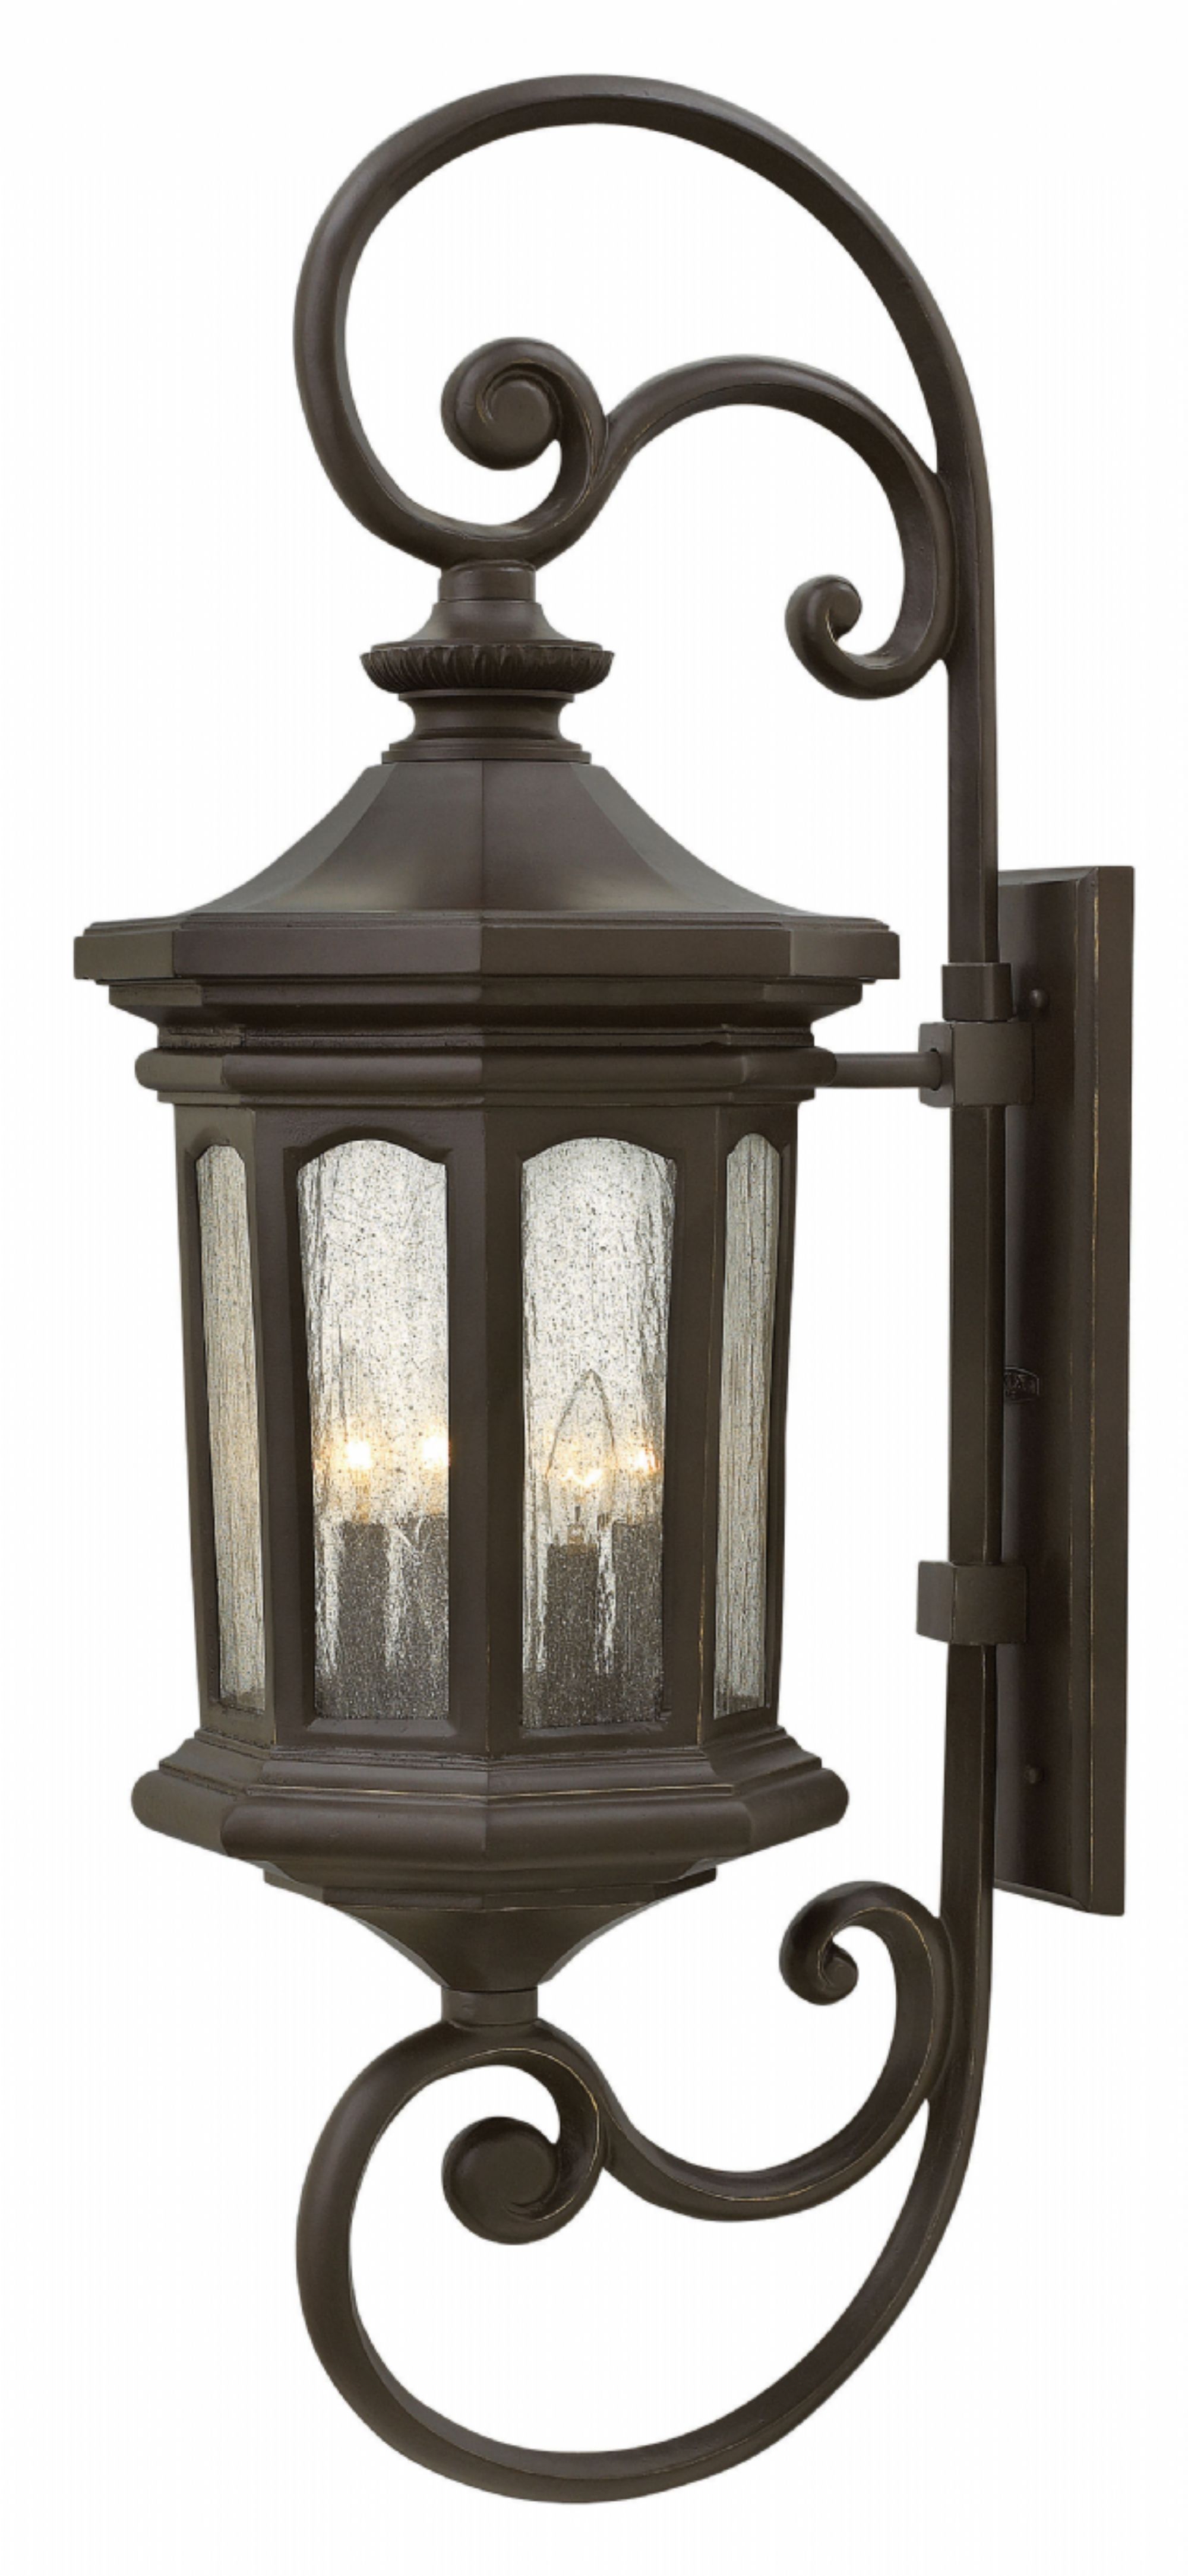 Related Image | Mediterranean Exterior Lighting | Pinterest Inside Extra Large Wall Mount Porch Hinkley Lighting (View 2 of 15)